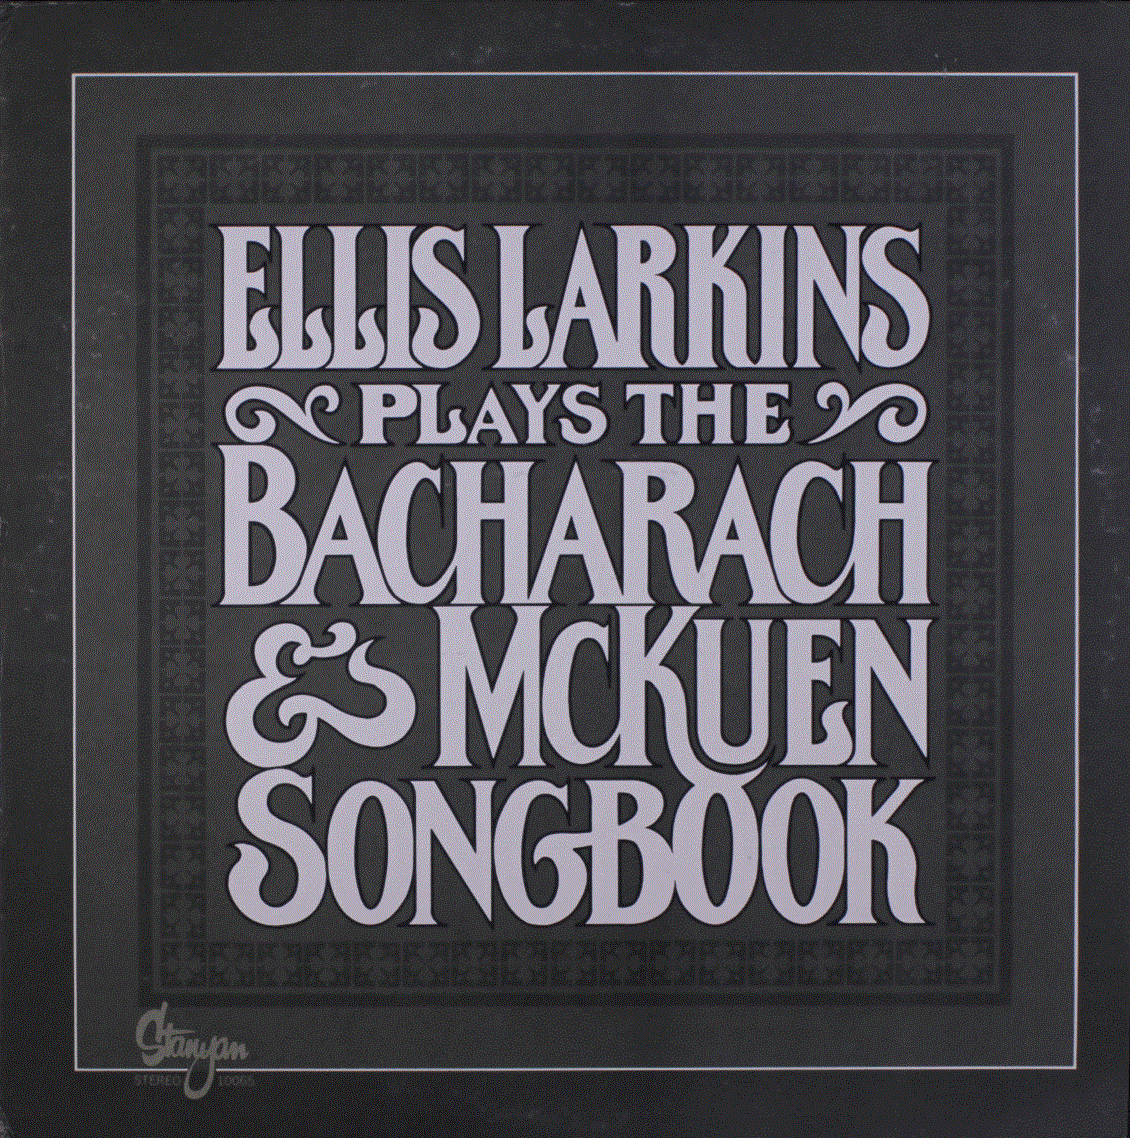 ELLIS LARKINS - Plays The Bacharach And Mckuen Songbook cover 